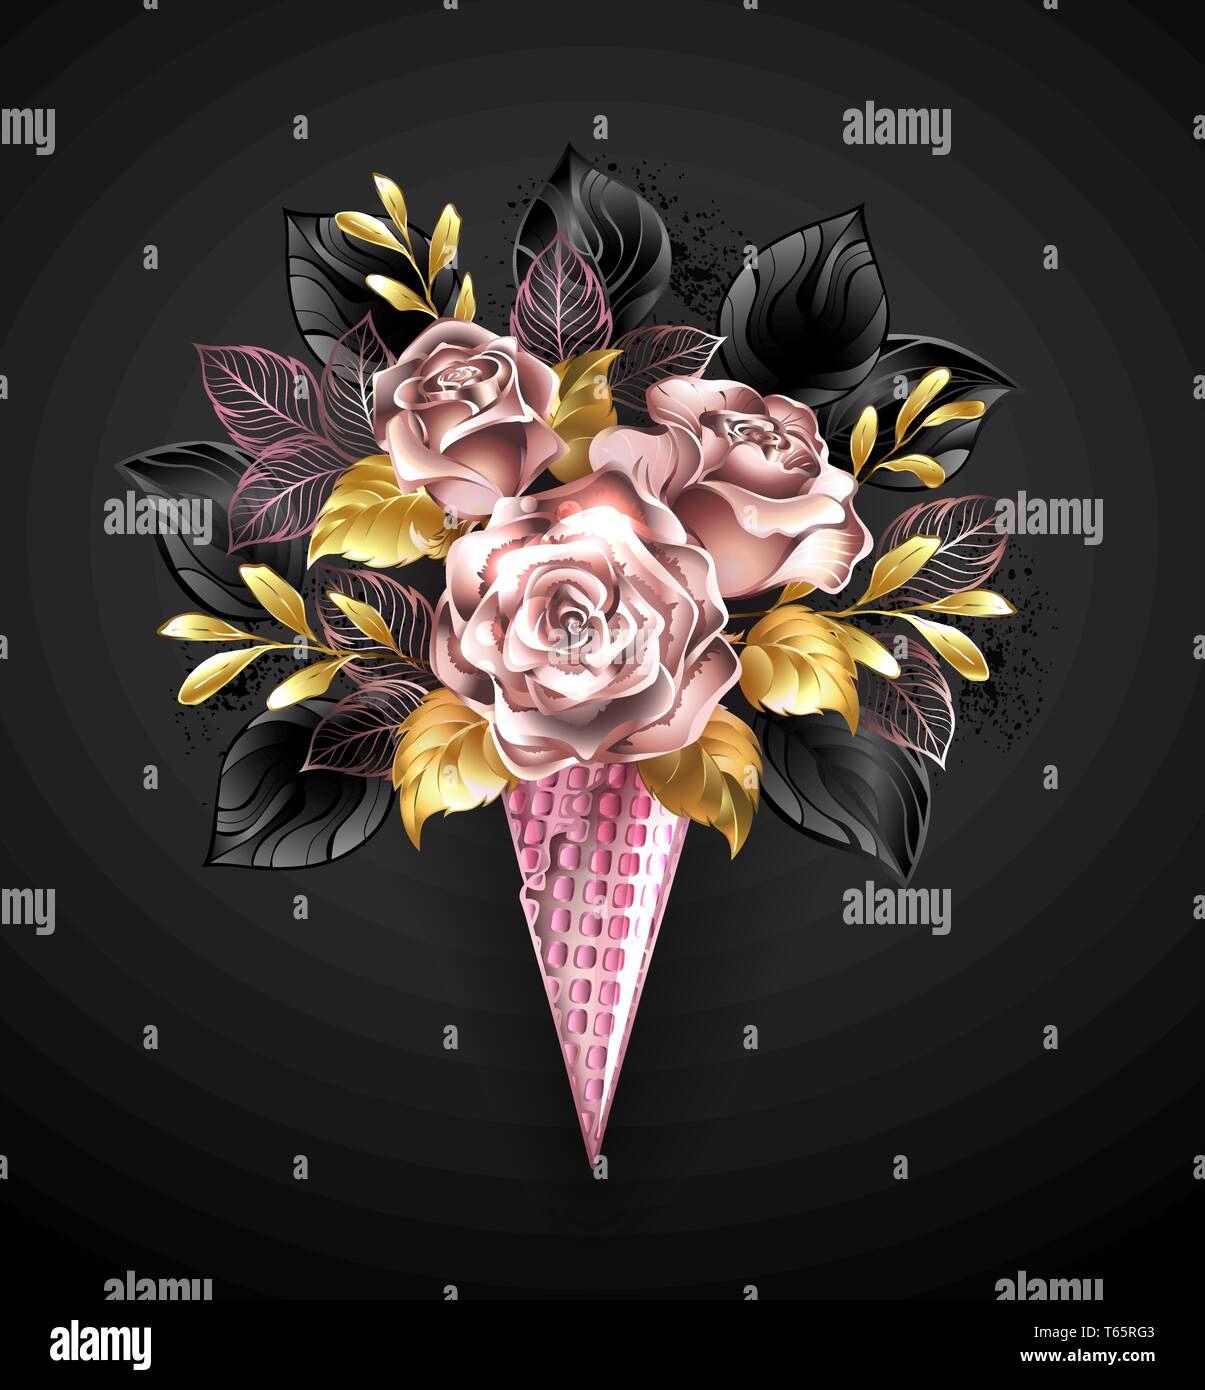 Waffle cones with rose gold roses with black decorative leaves on black background. Stock Vector